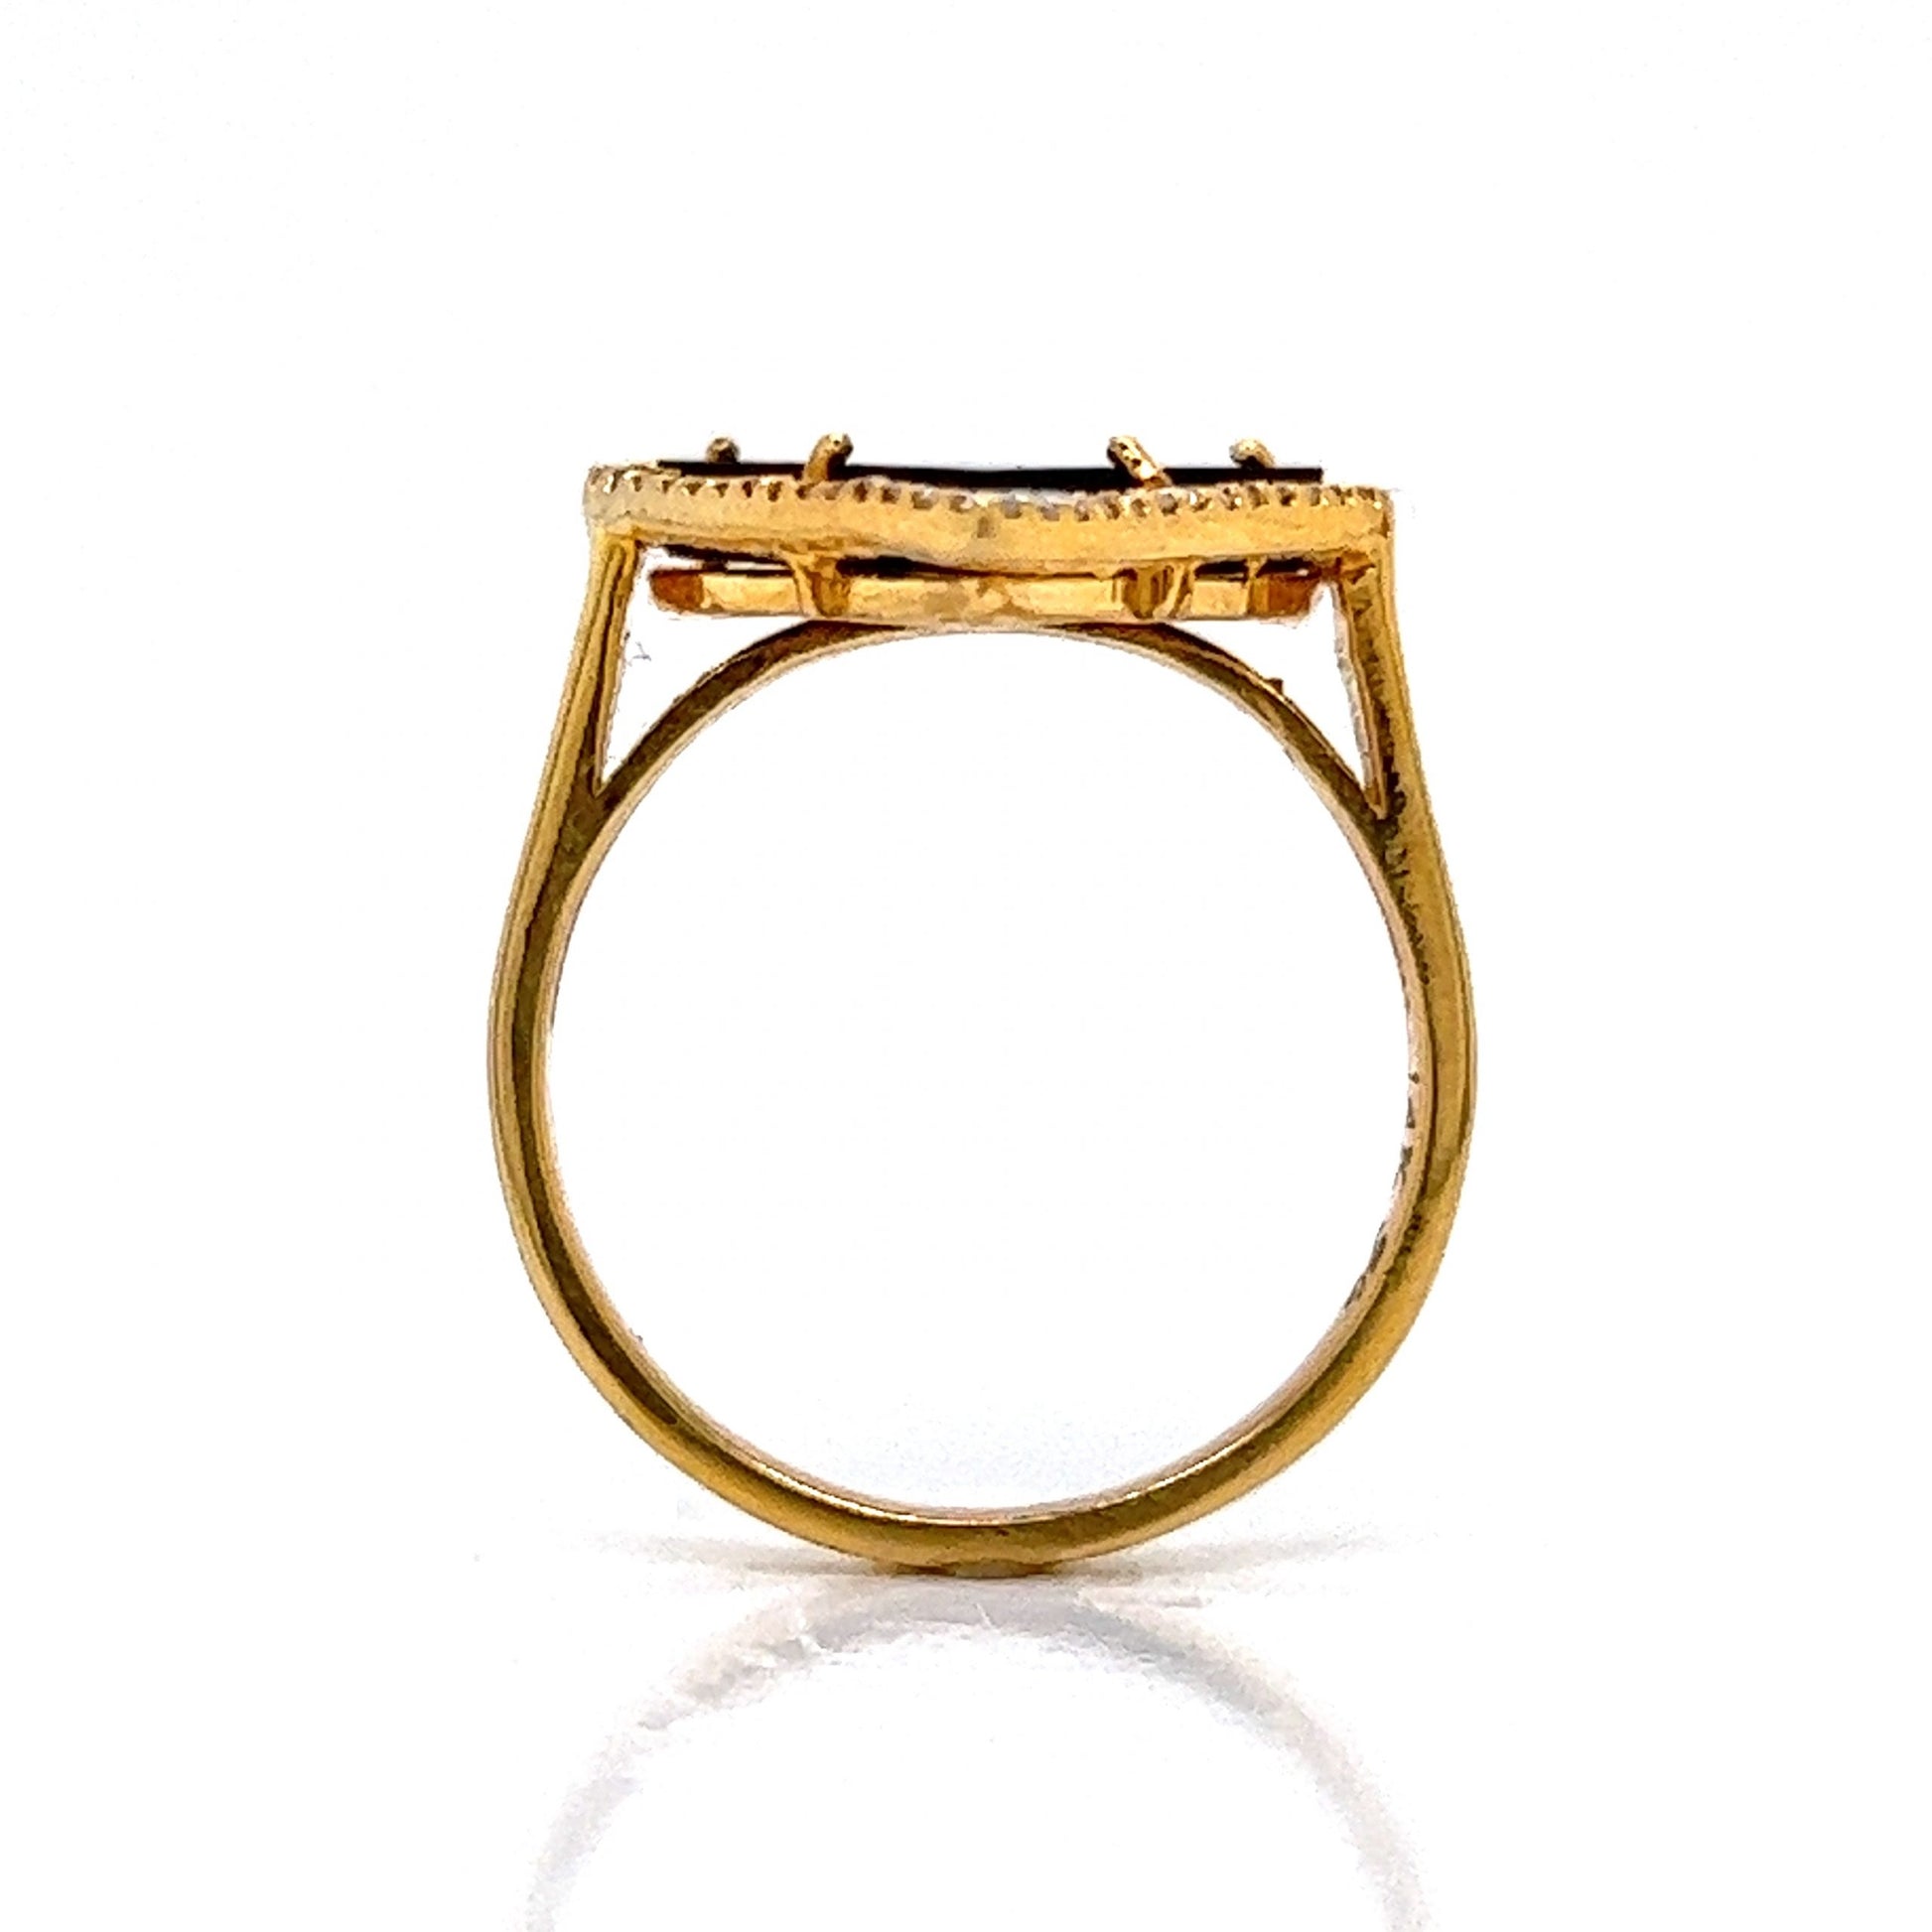 Heart Shaped Onyx & Diamond Cocktail Ring in 14k Yellow Gold